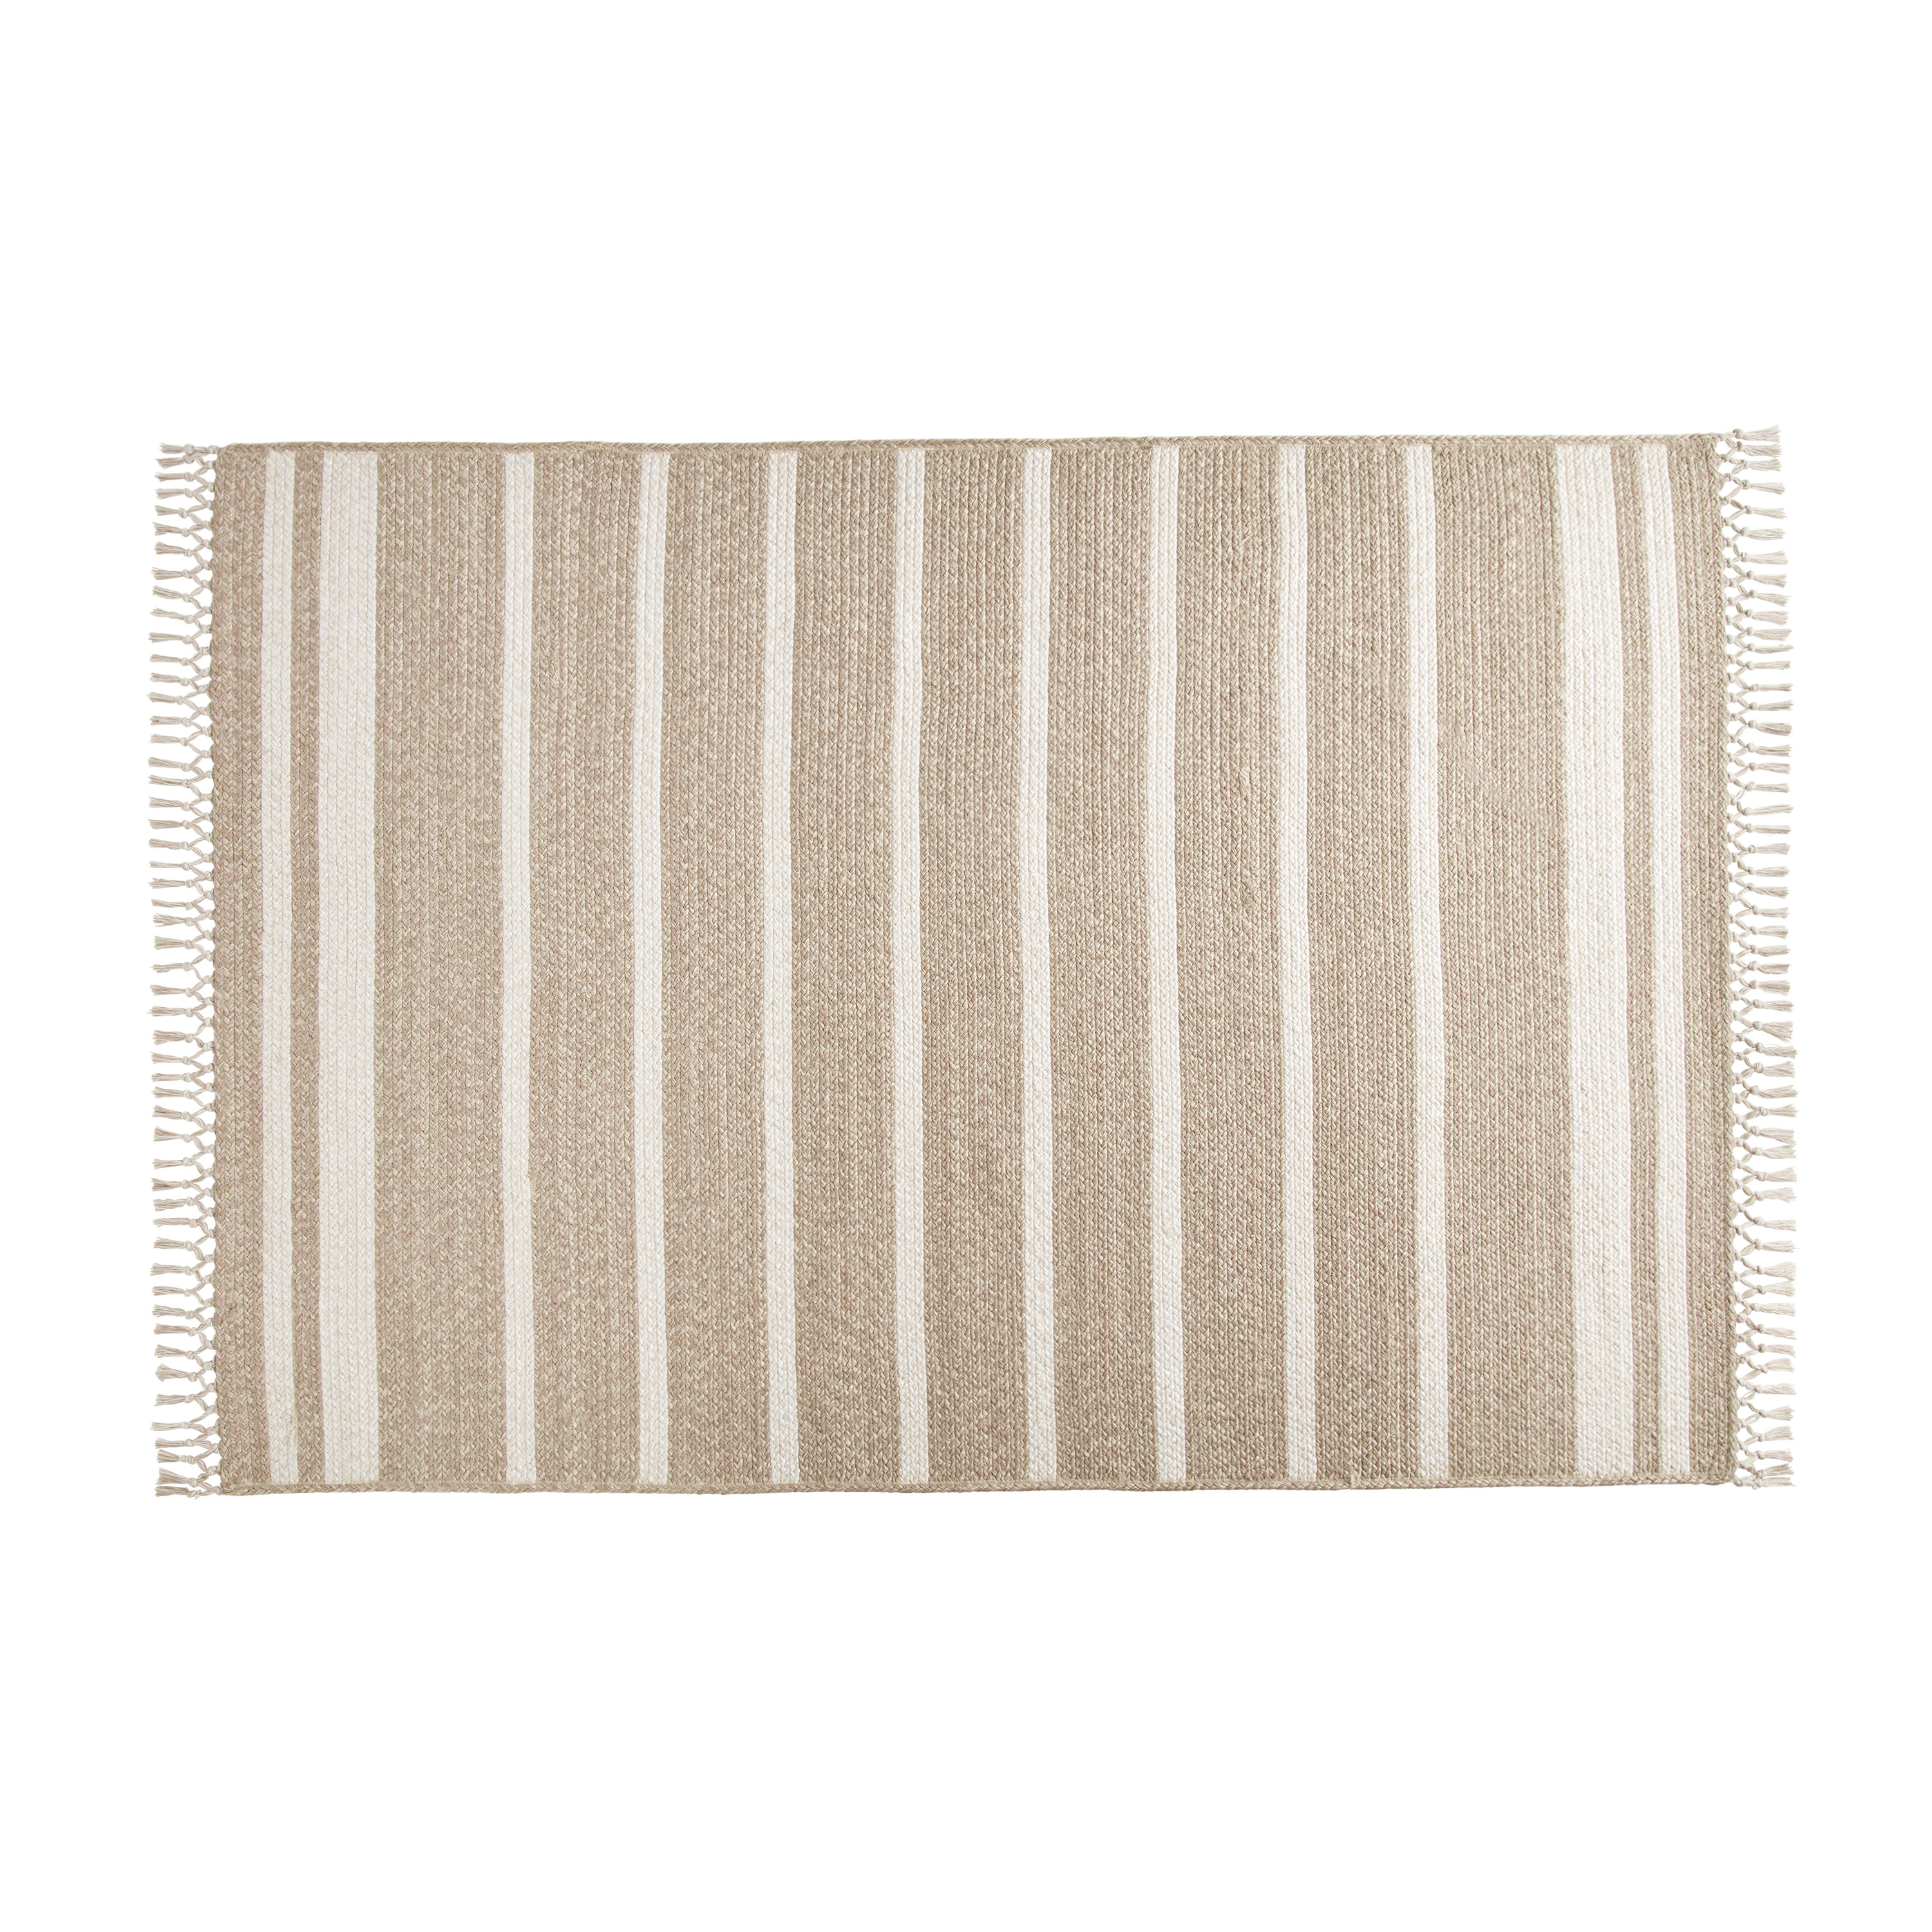 Better Homes & Gardens 5'x7' Striped Natural Outdoor Rug by Dave & Jenny Marrs - image 1 of 10